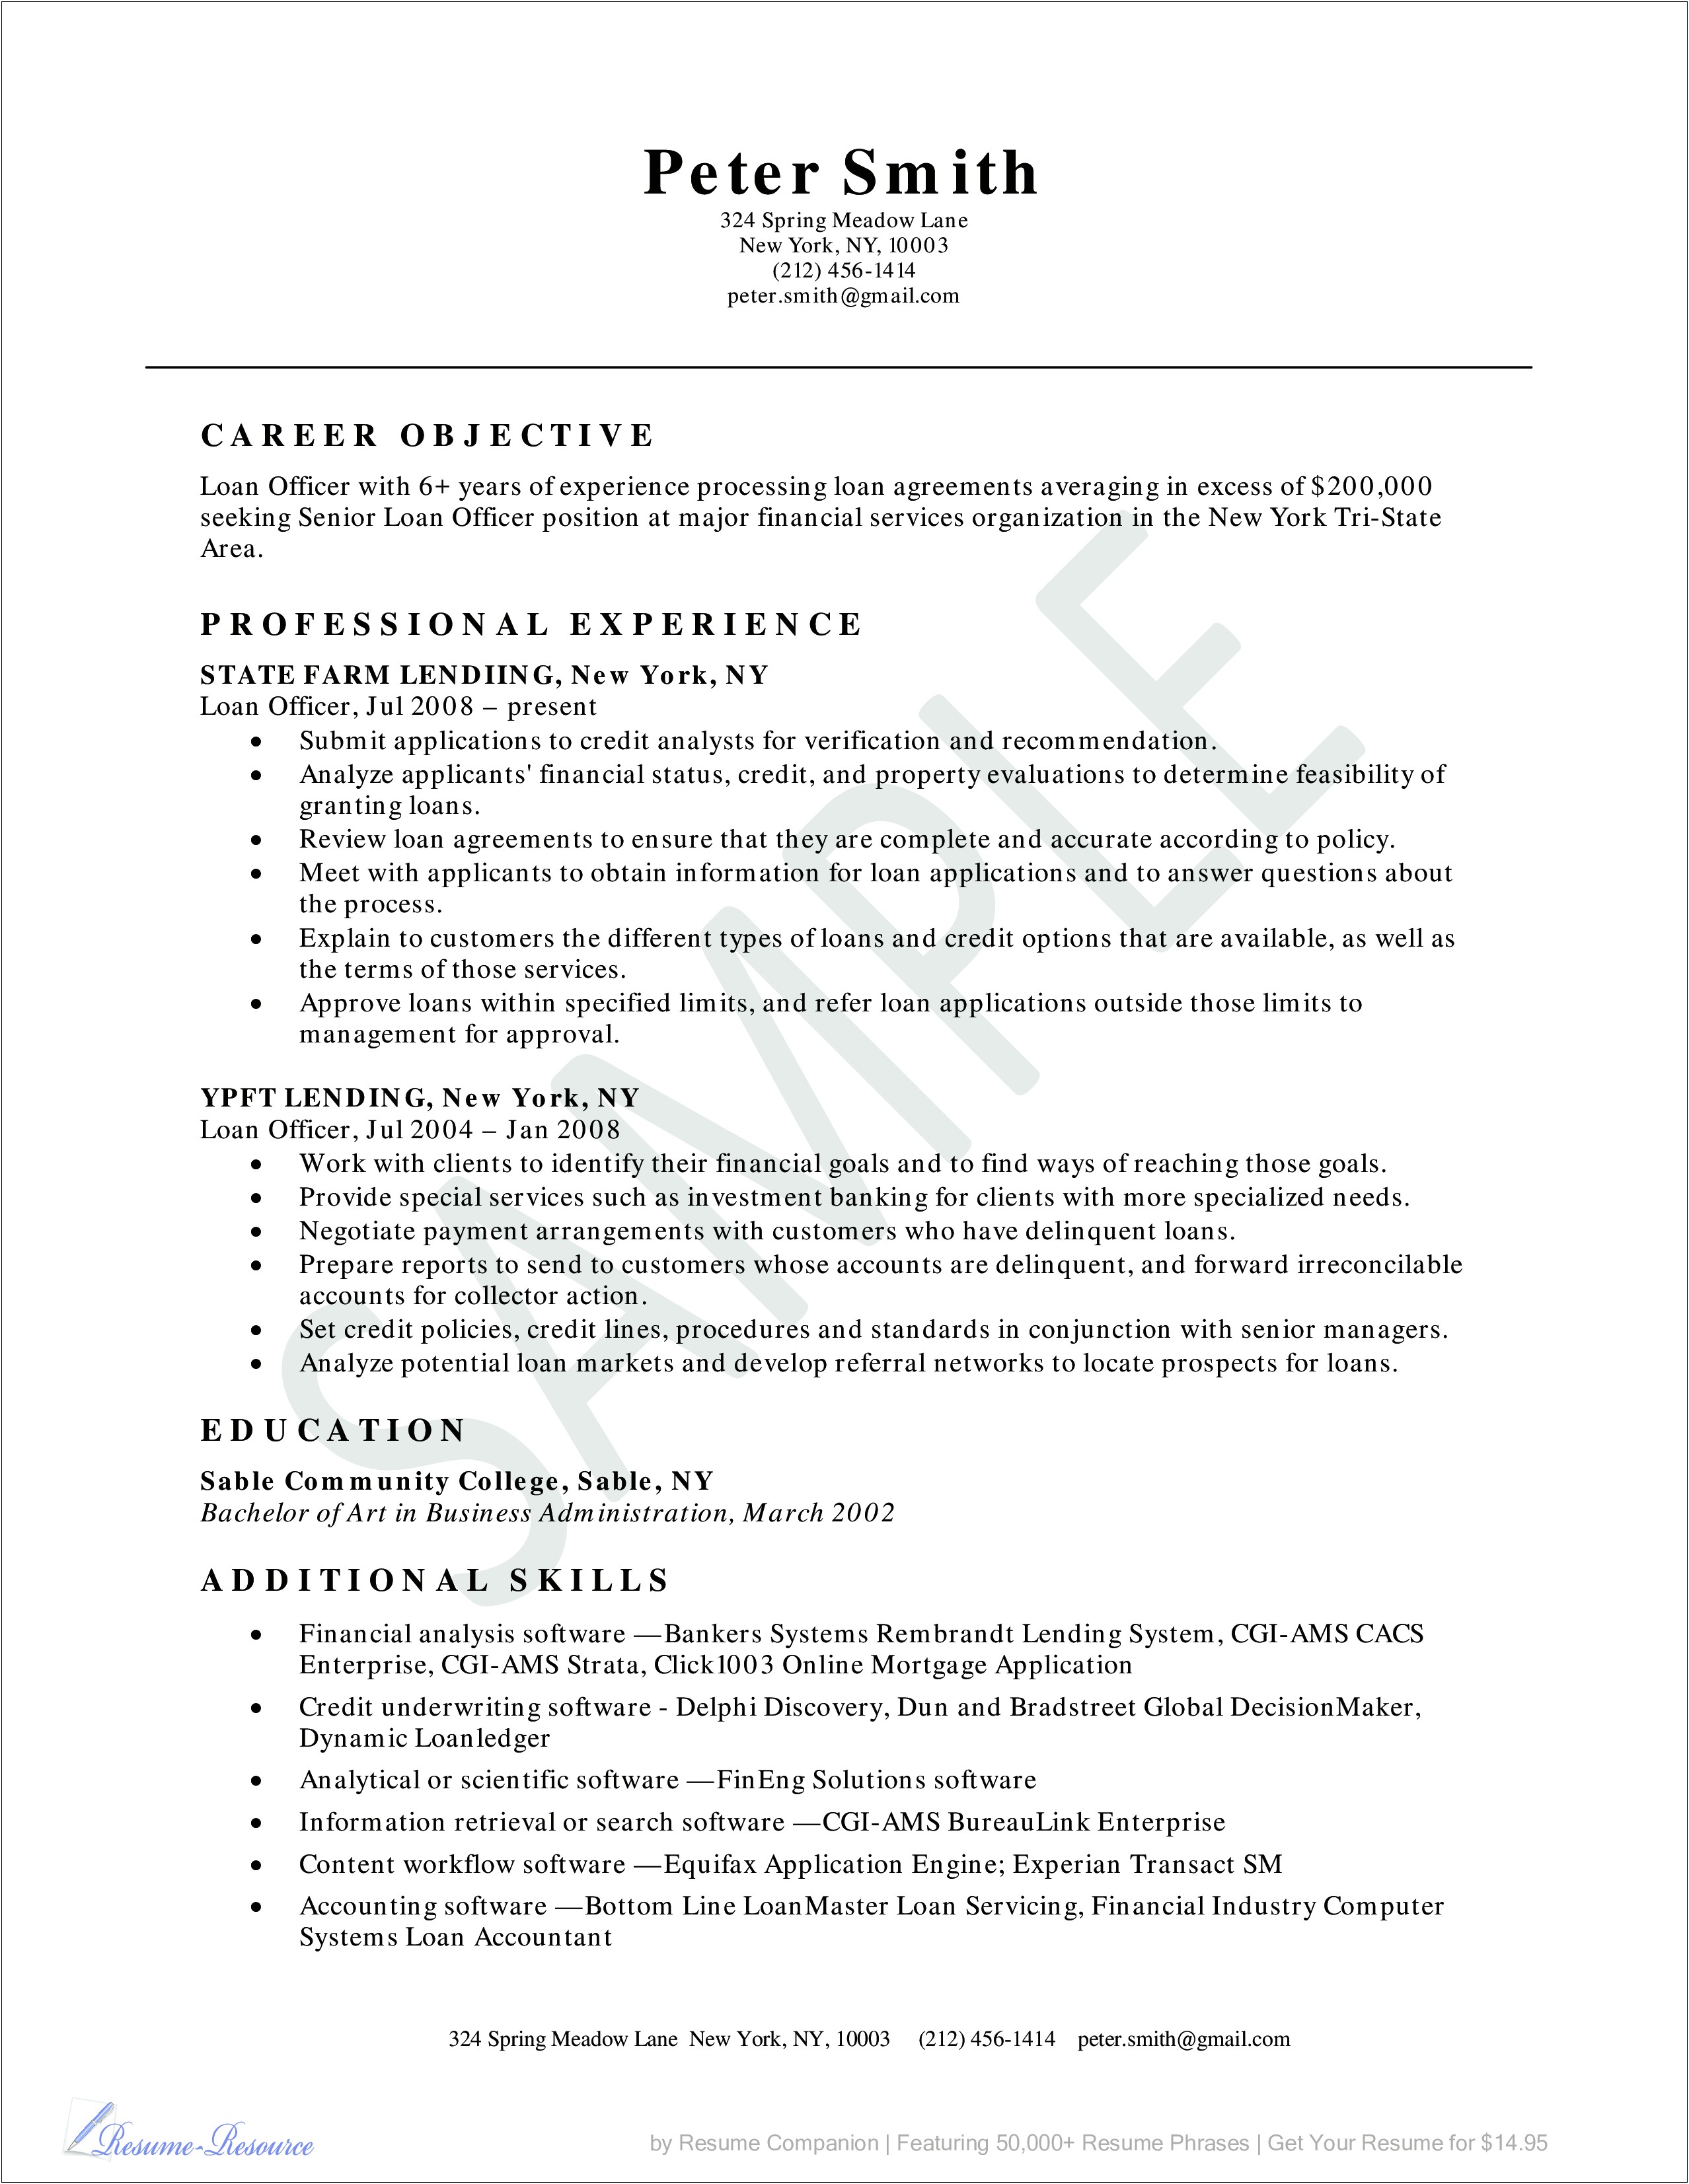 Resume Objectives For Business School